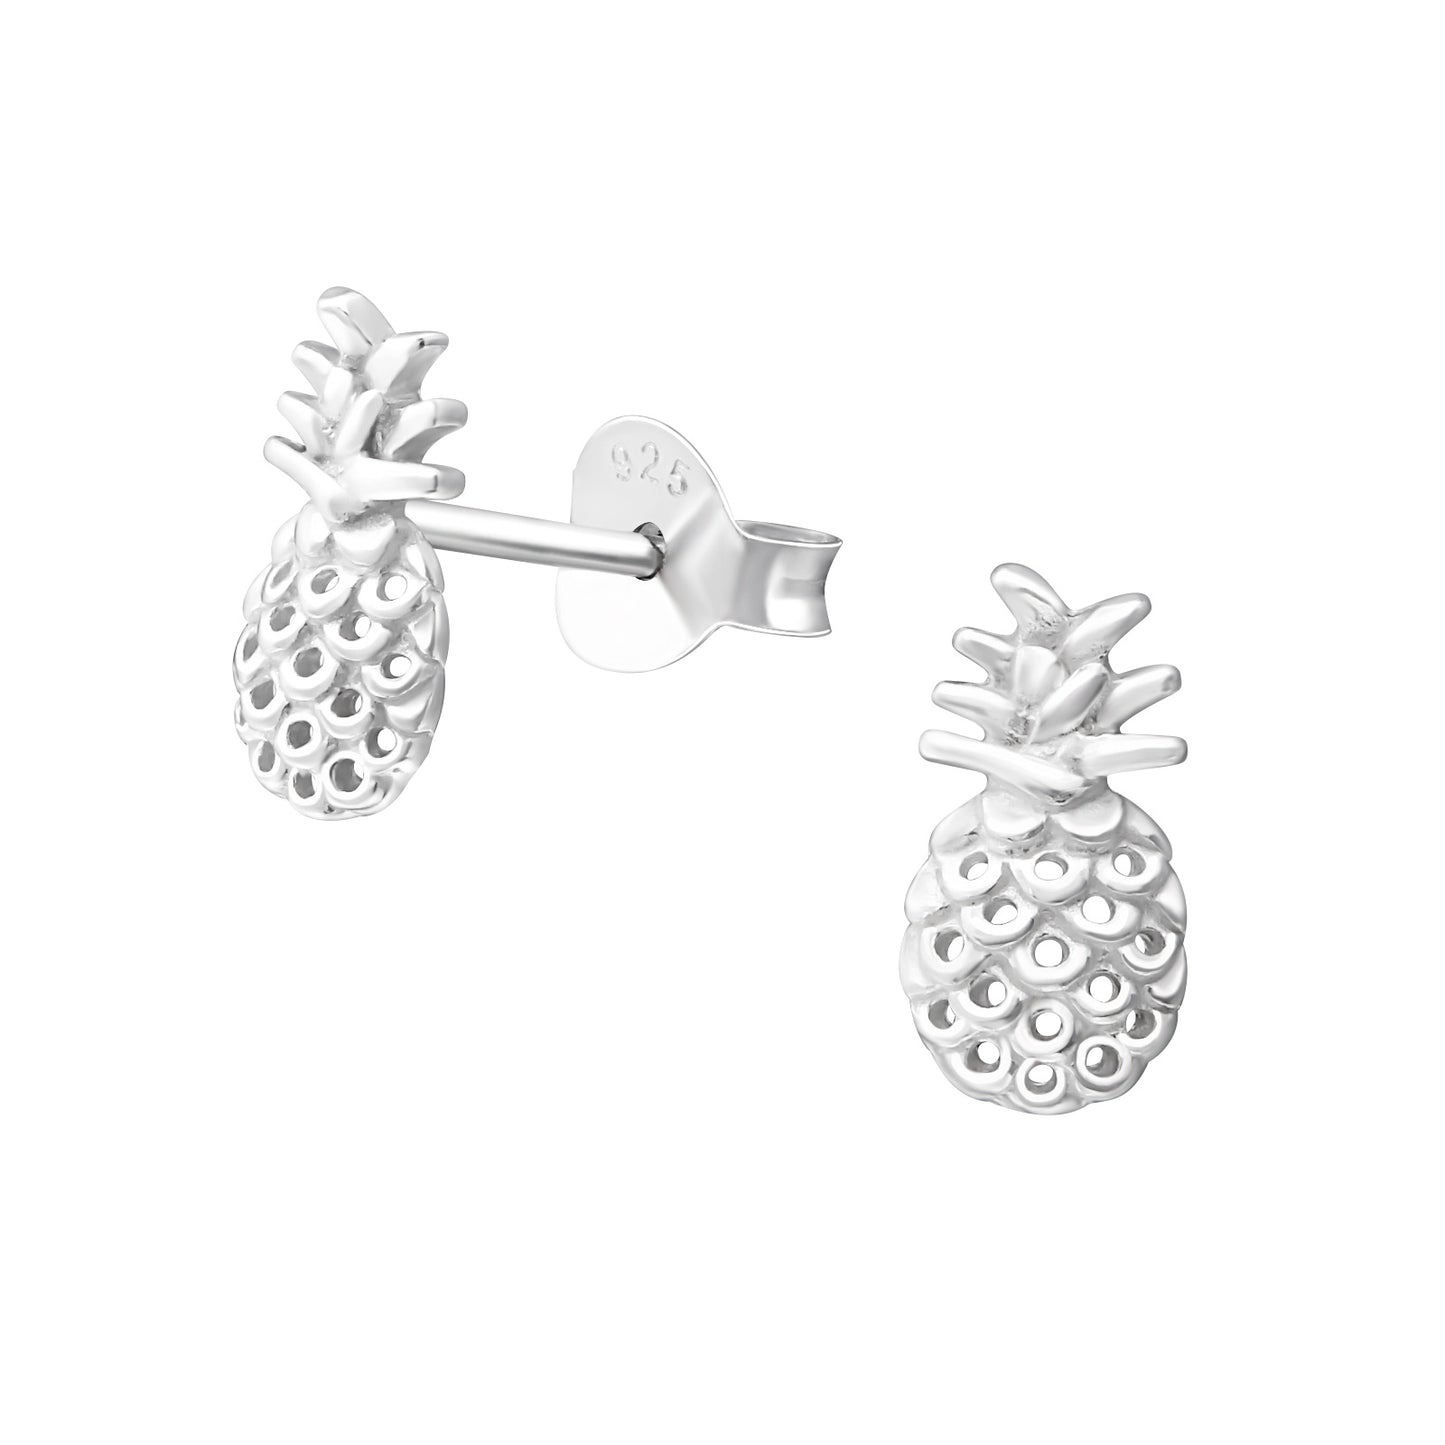 Stand tall and wear a crown with this pretty pineapple stud earrings.